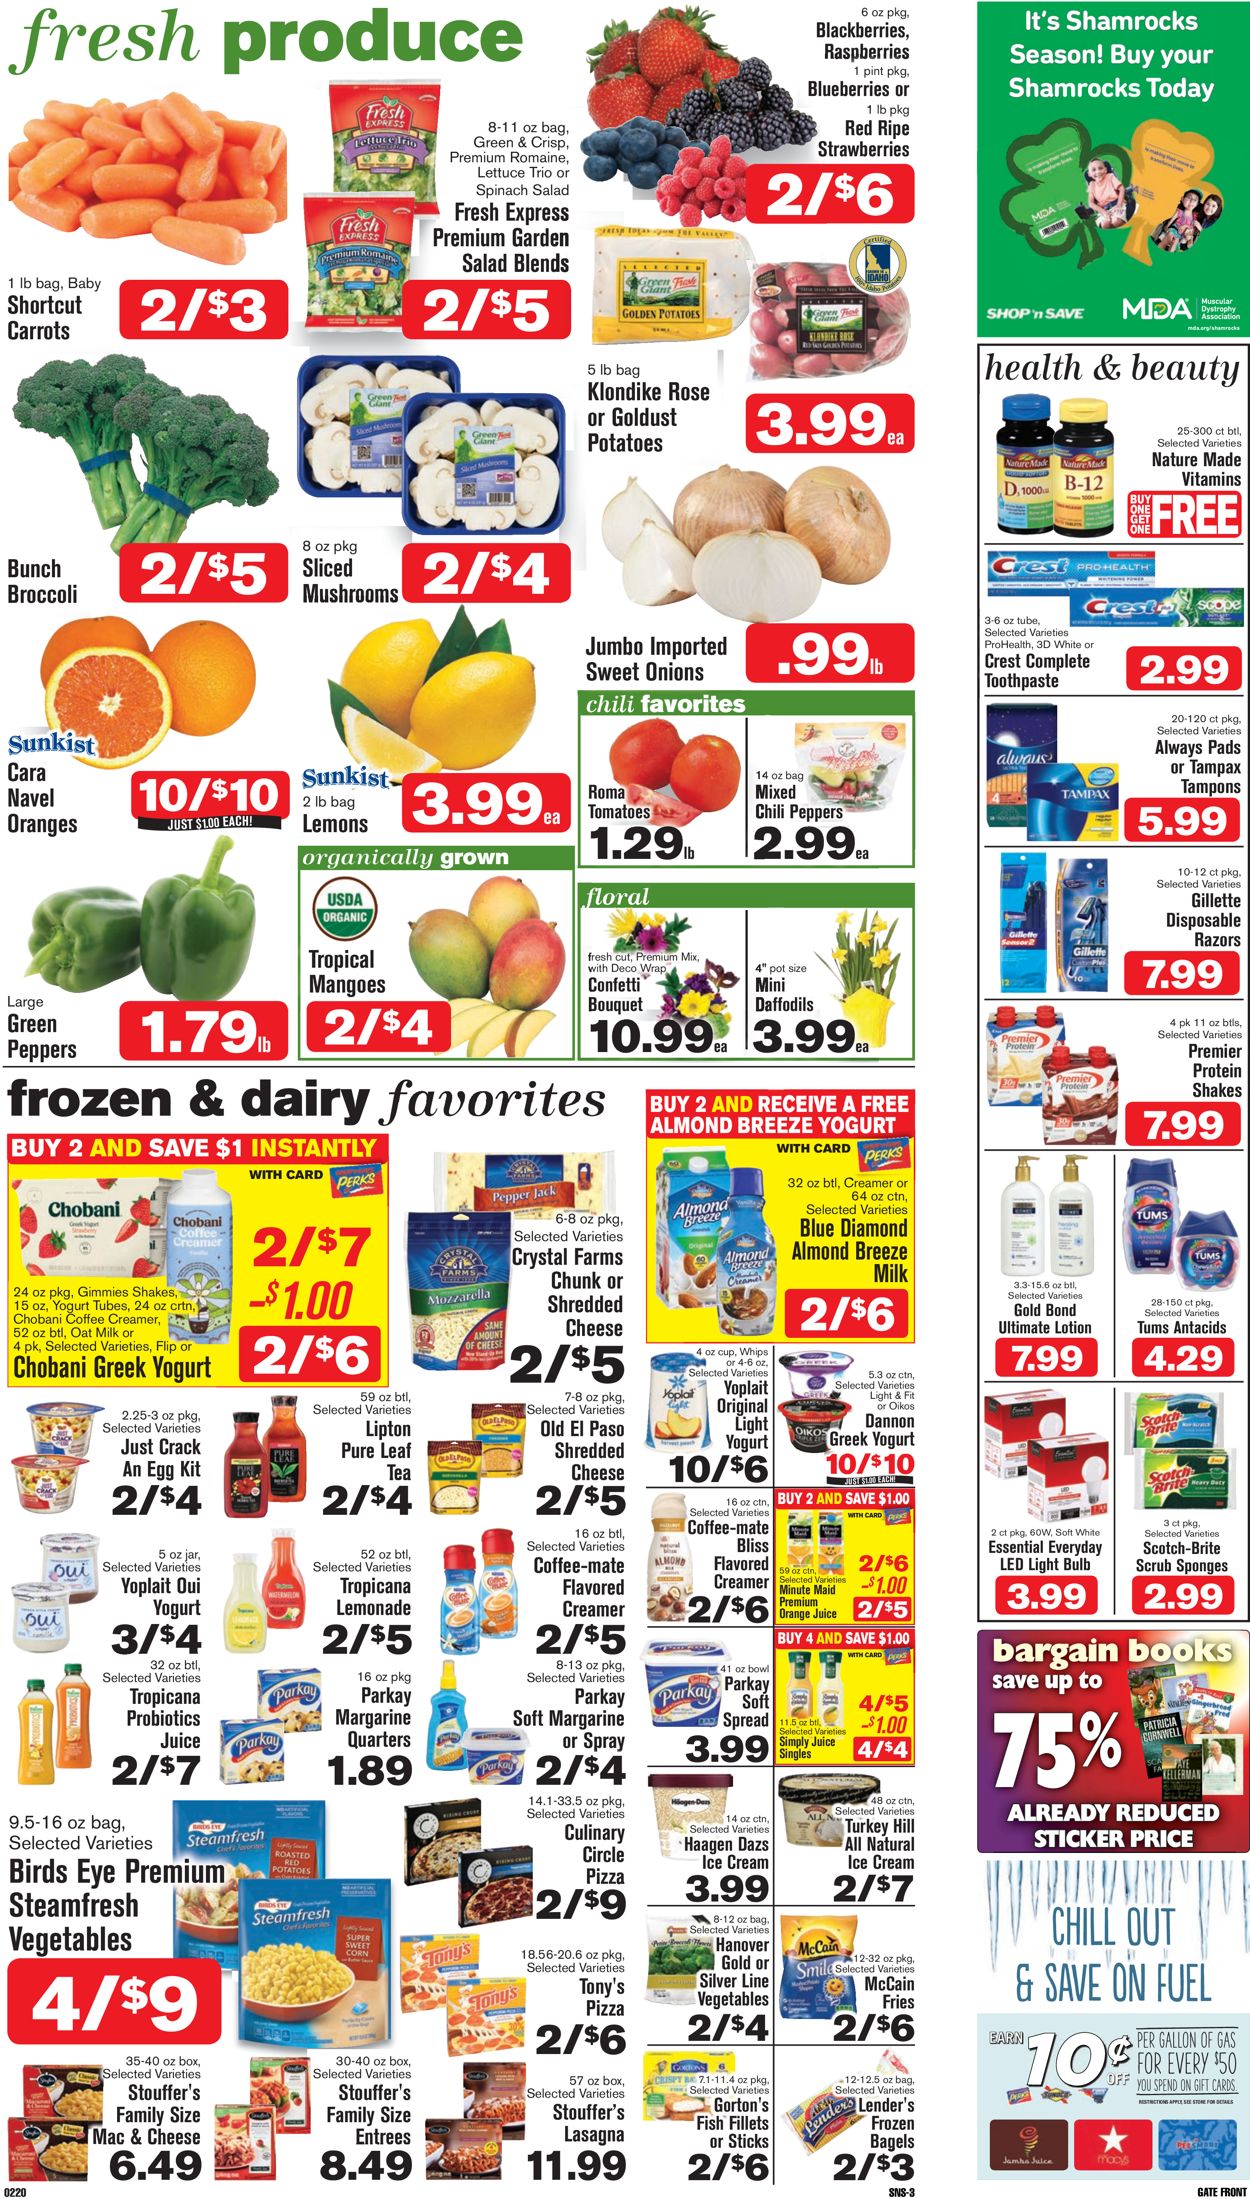 Catalogue Shop ‘n Save (Pittsburgh) from 02/20/2020